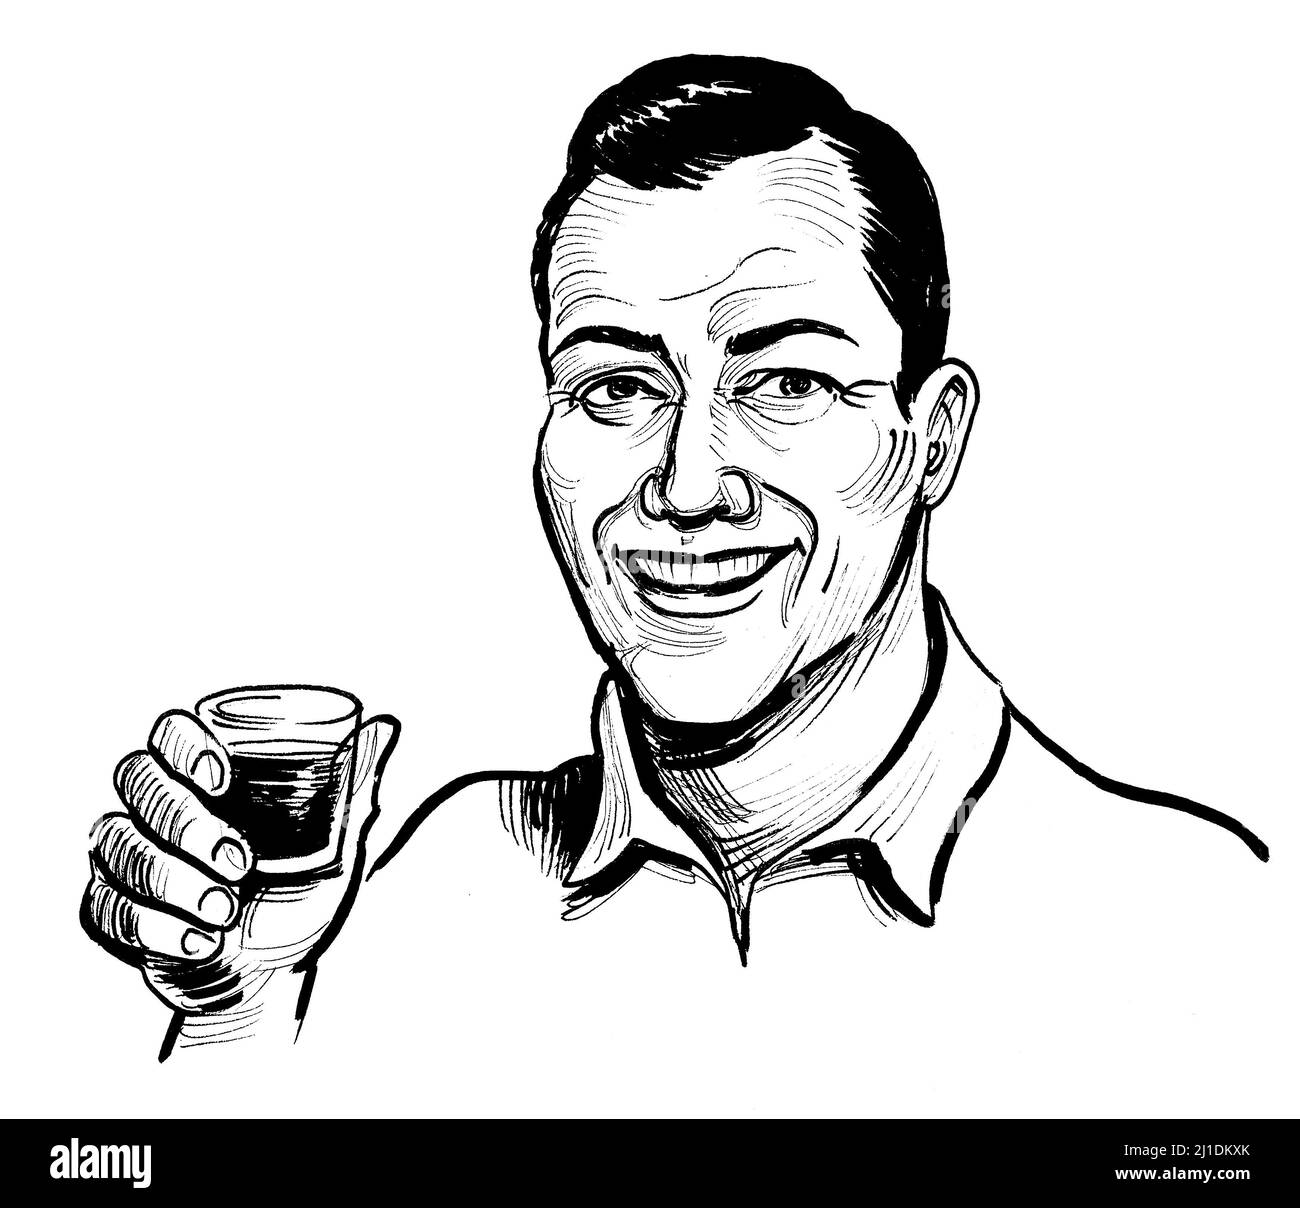 Man drinking glass of whiskey. Ink black and white drawing Stock Photo